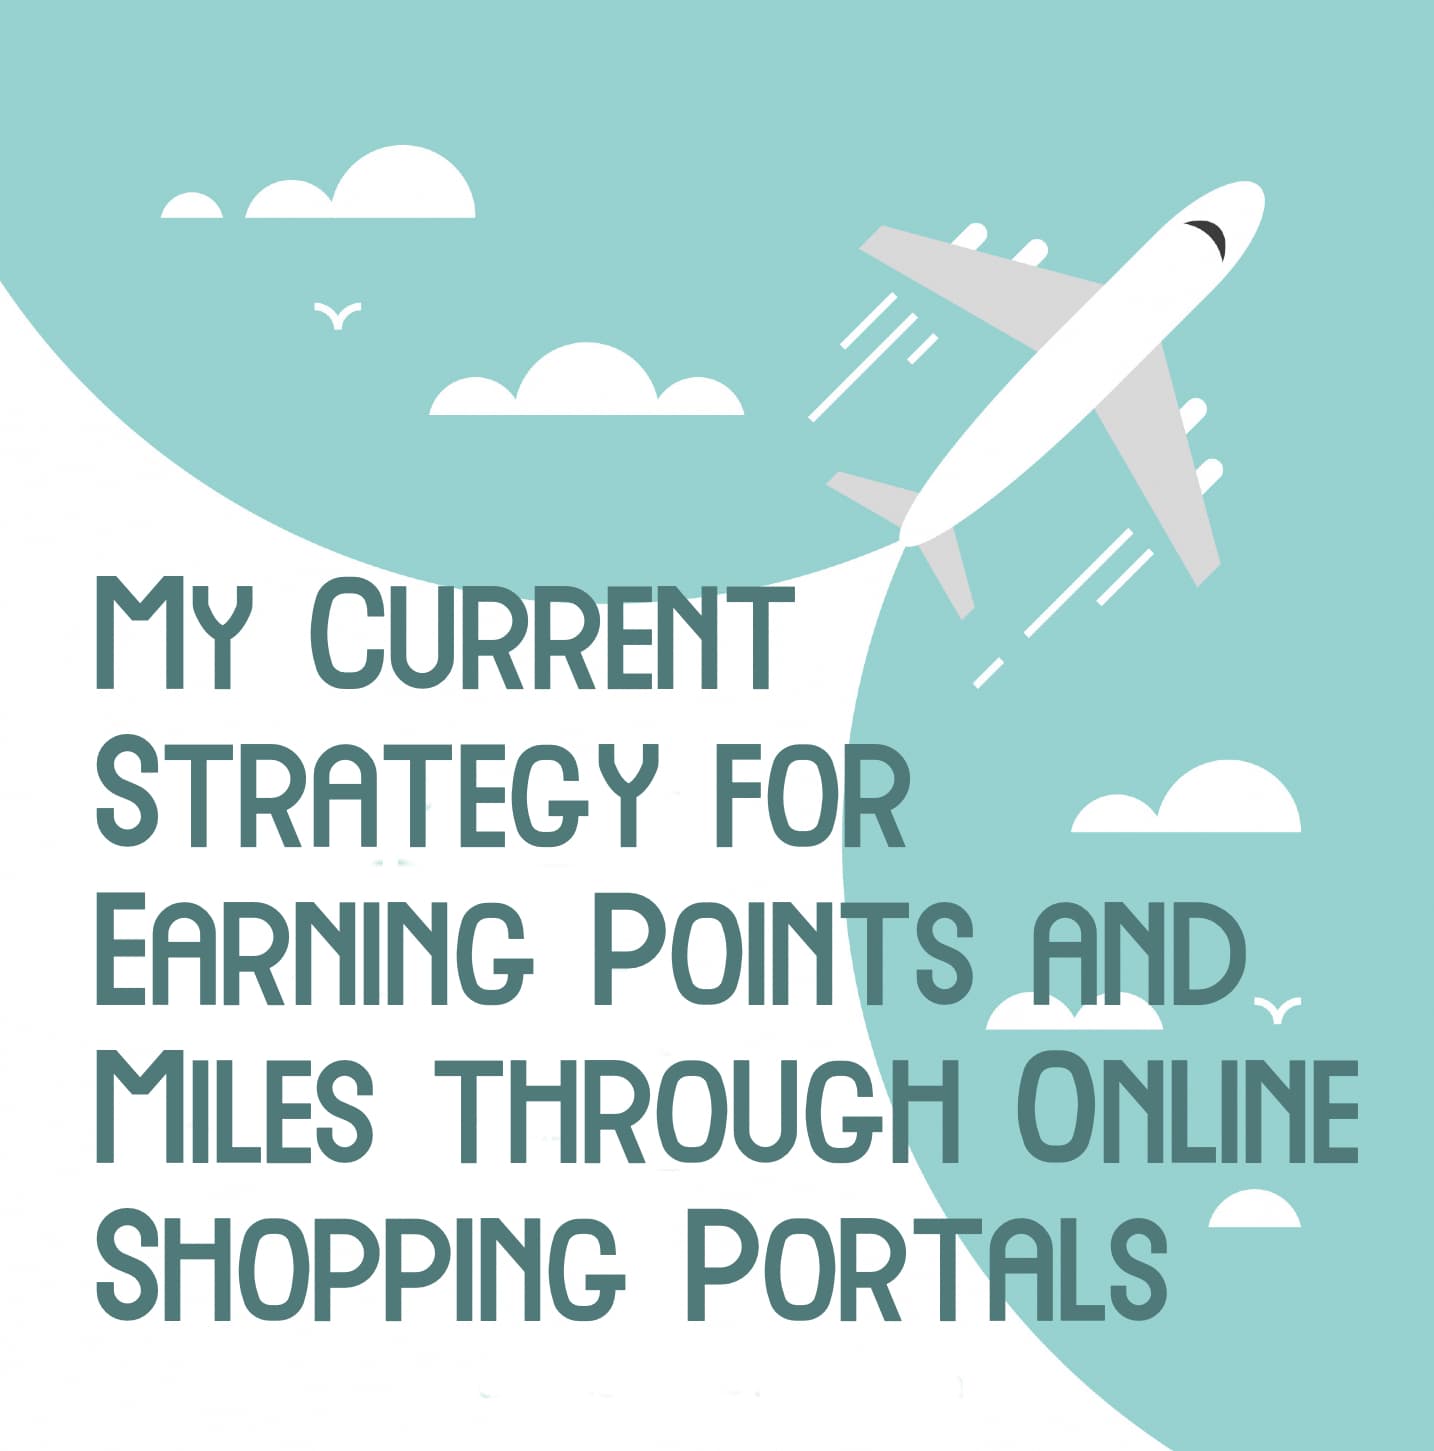 You are currently viewing My Current Strategy for Earning Points and Miles through Online Shopping Portals